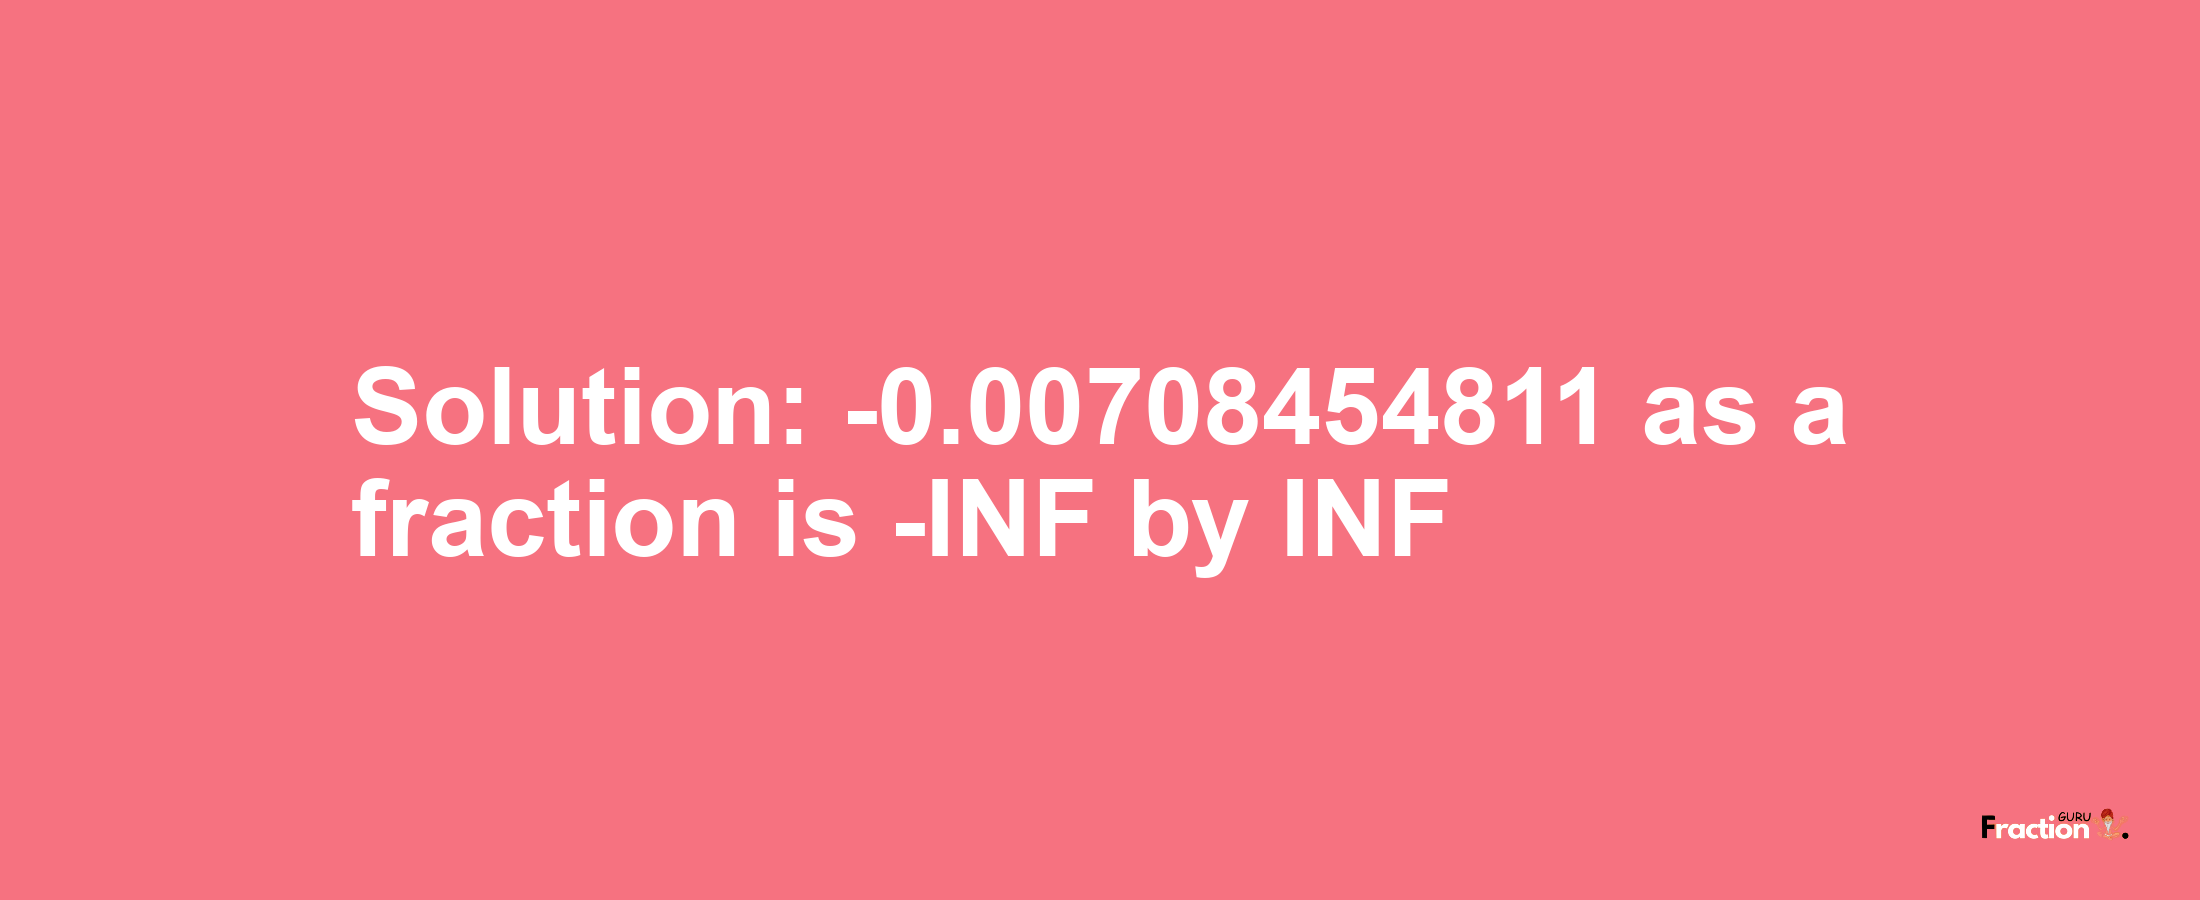 Solution:-0.00708454811 as a fraction is -INF/INF